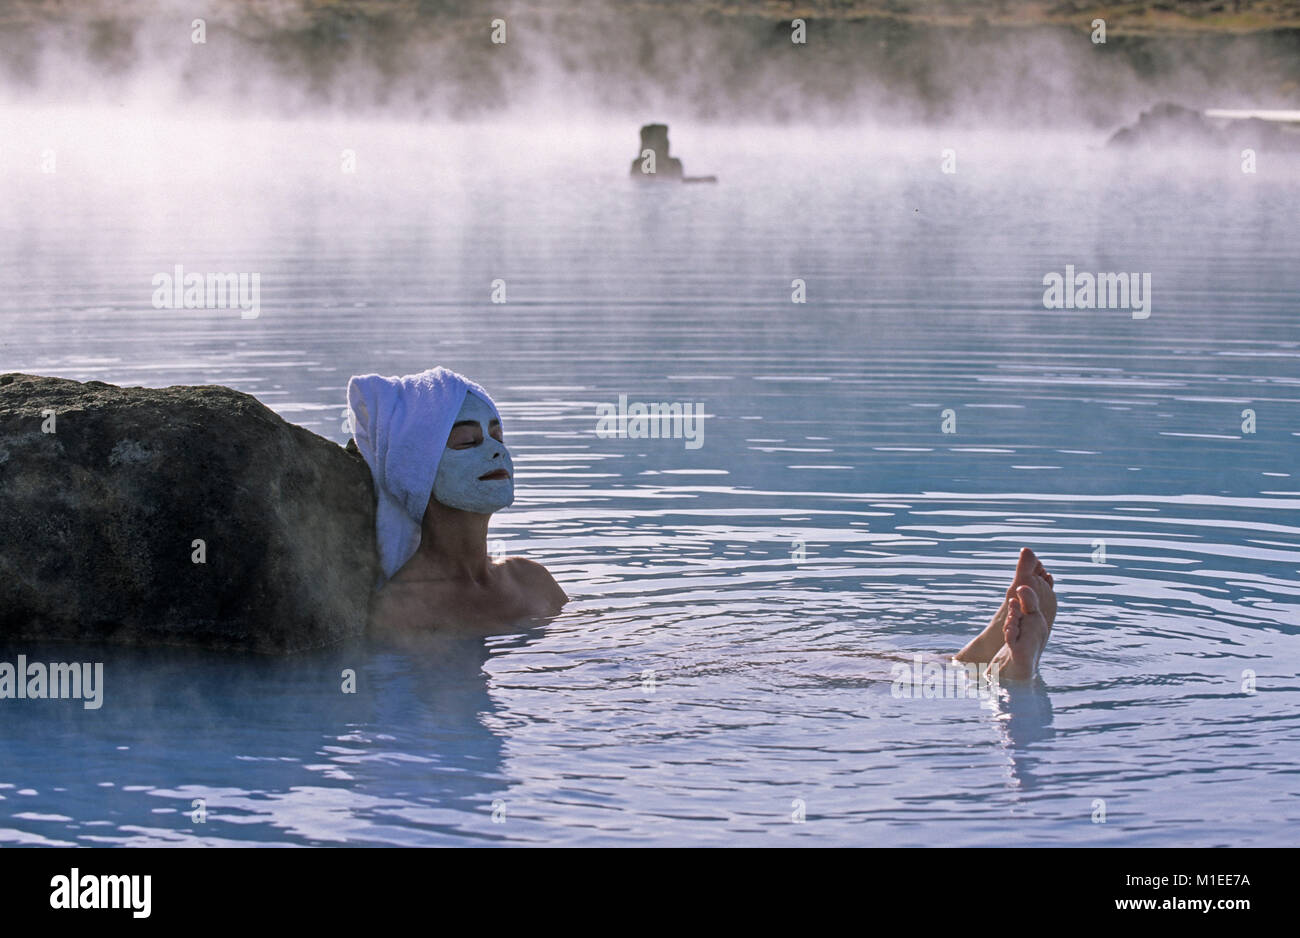 Iceland. Myvatn. Myvatn Nature Baths. Woman wearing beauty mask, towel on head, sitting in geothermal spa. Stock Photo